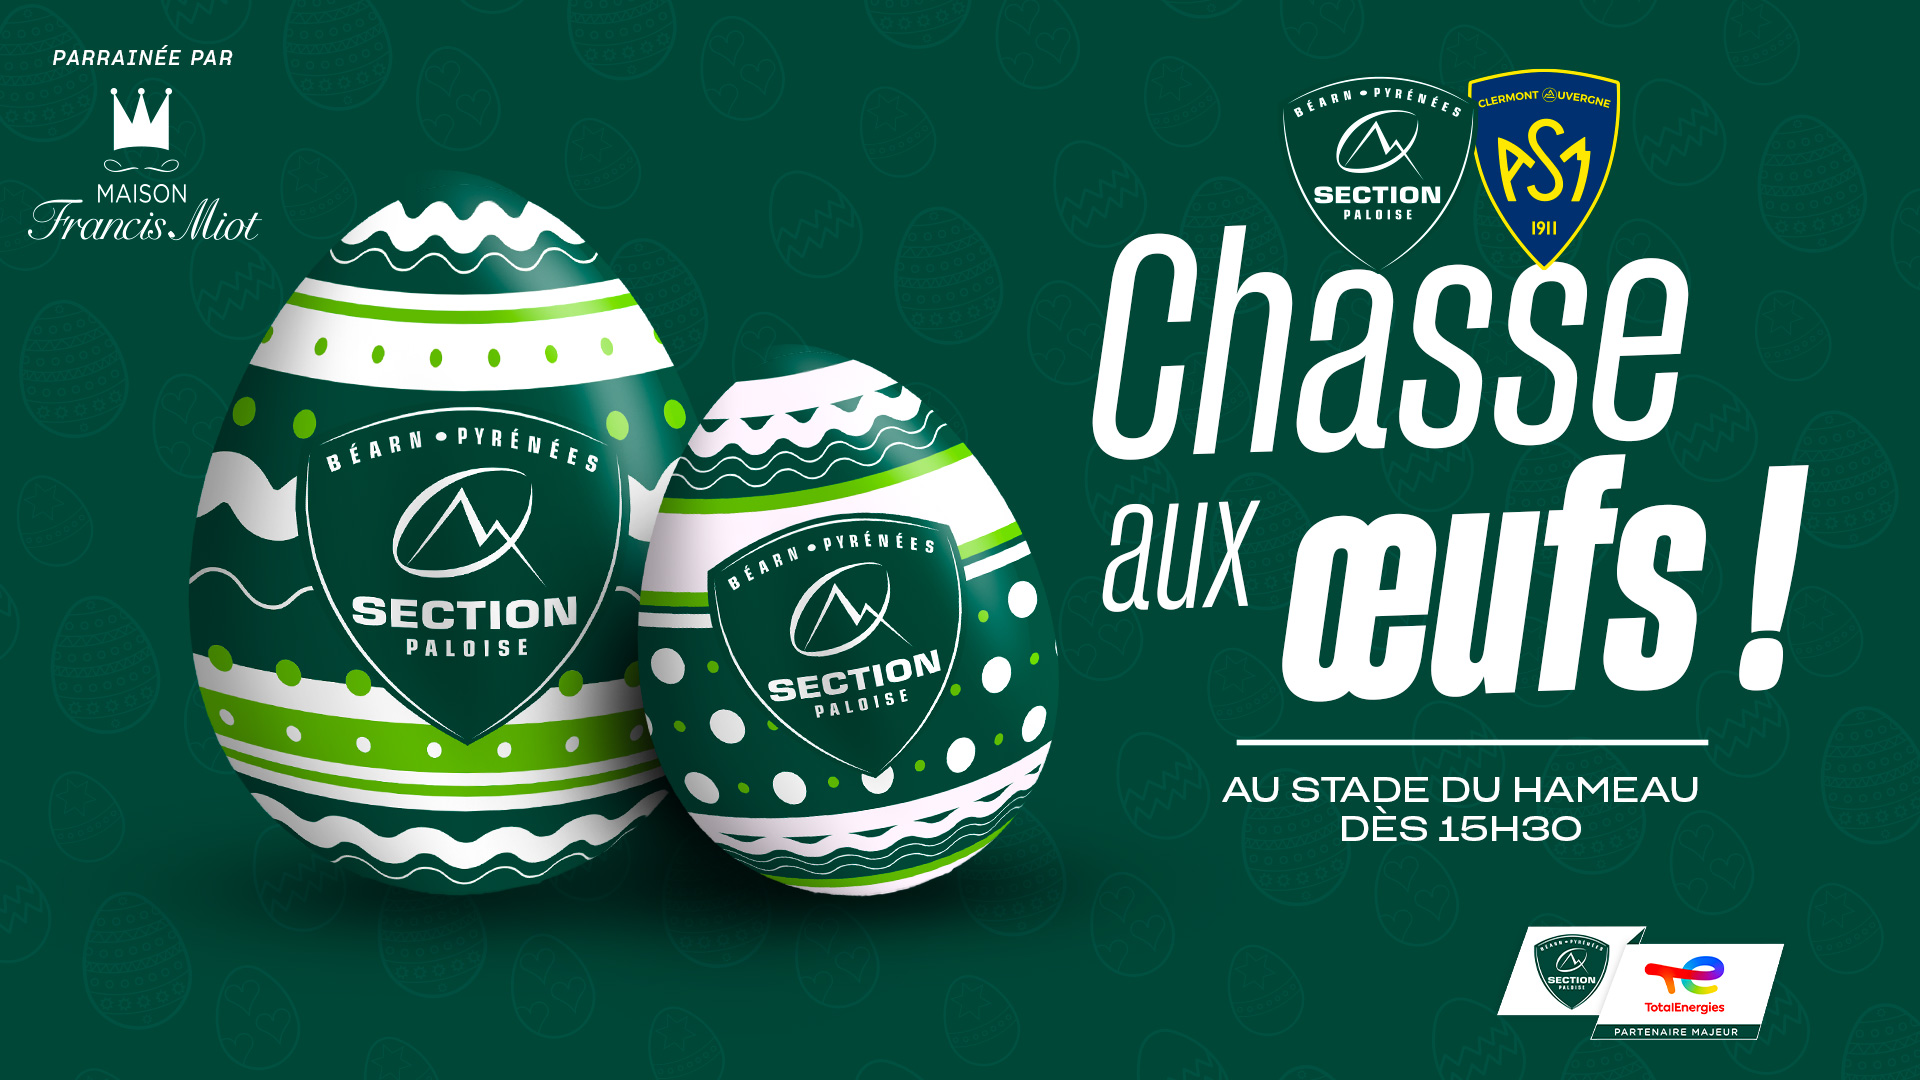 CHASSE AUX OEUFS 1920x1080